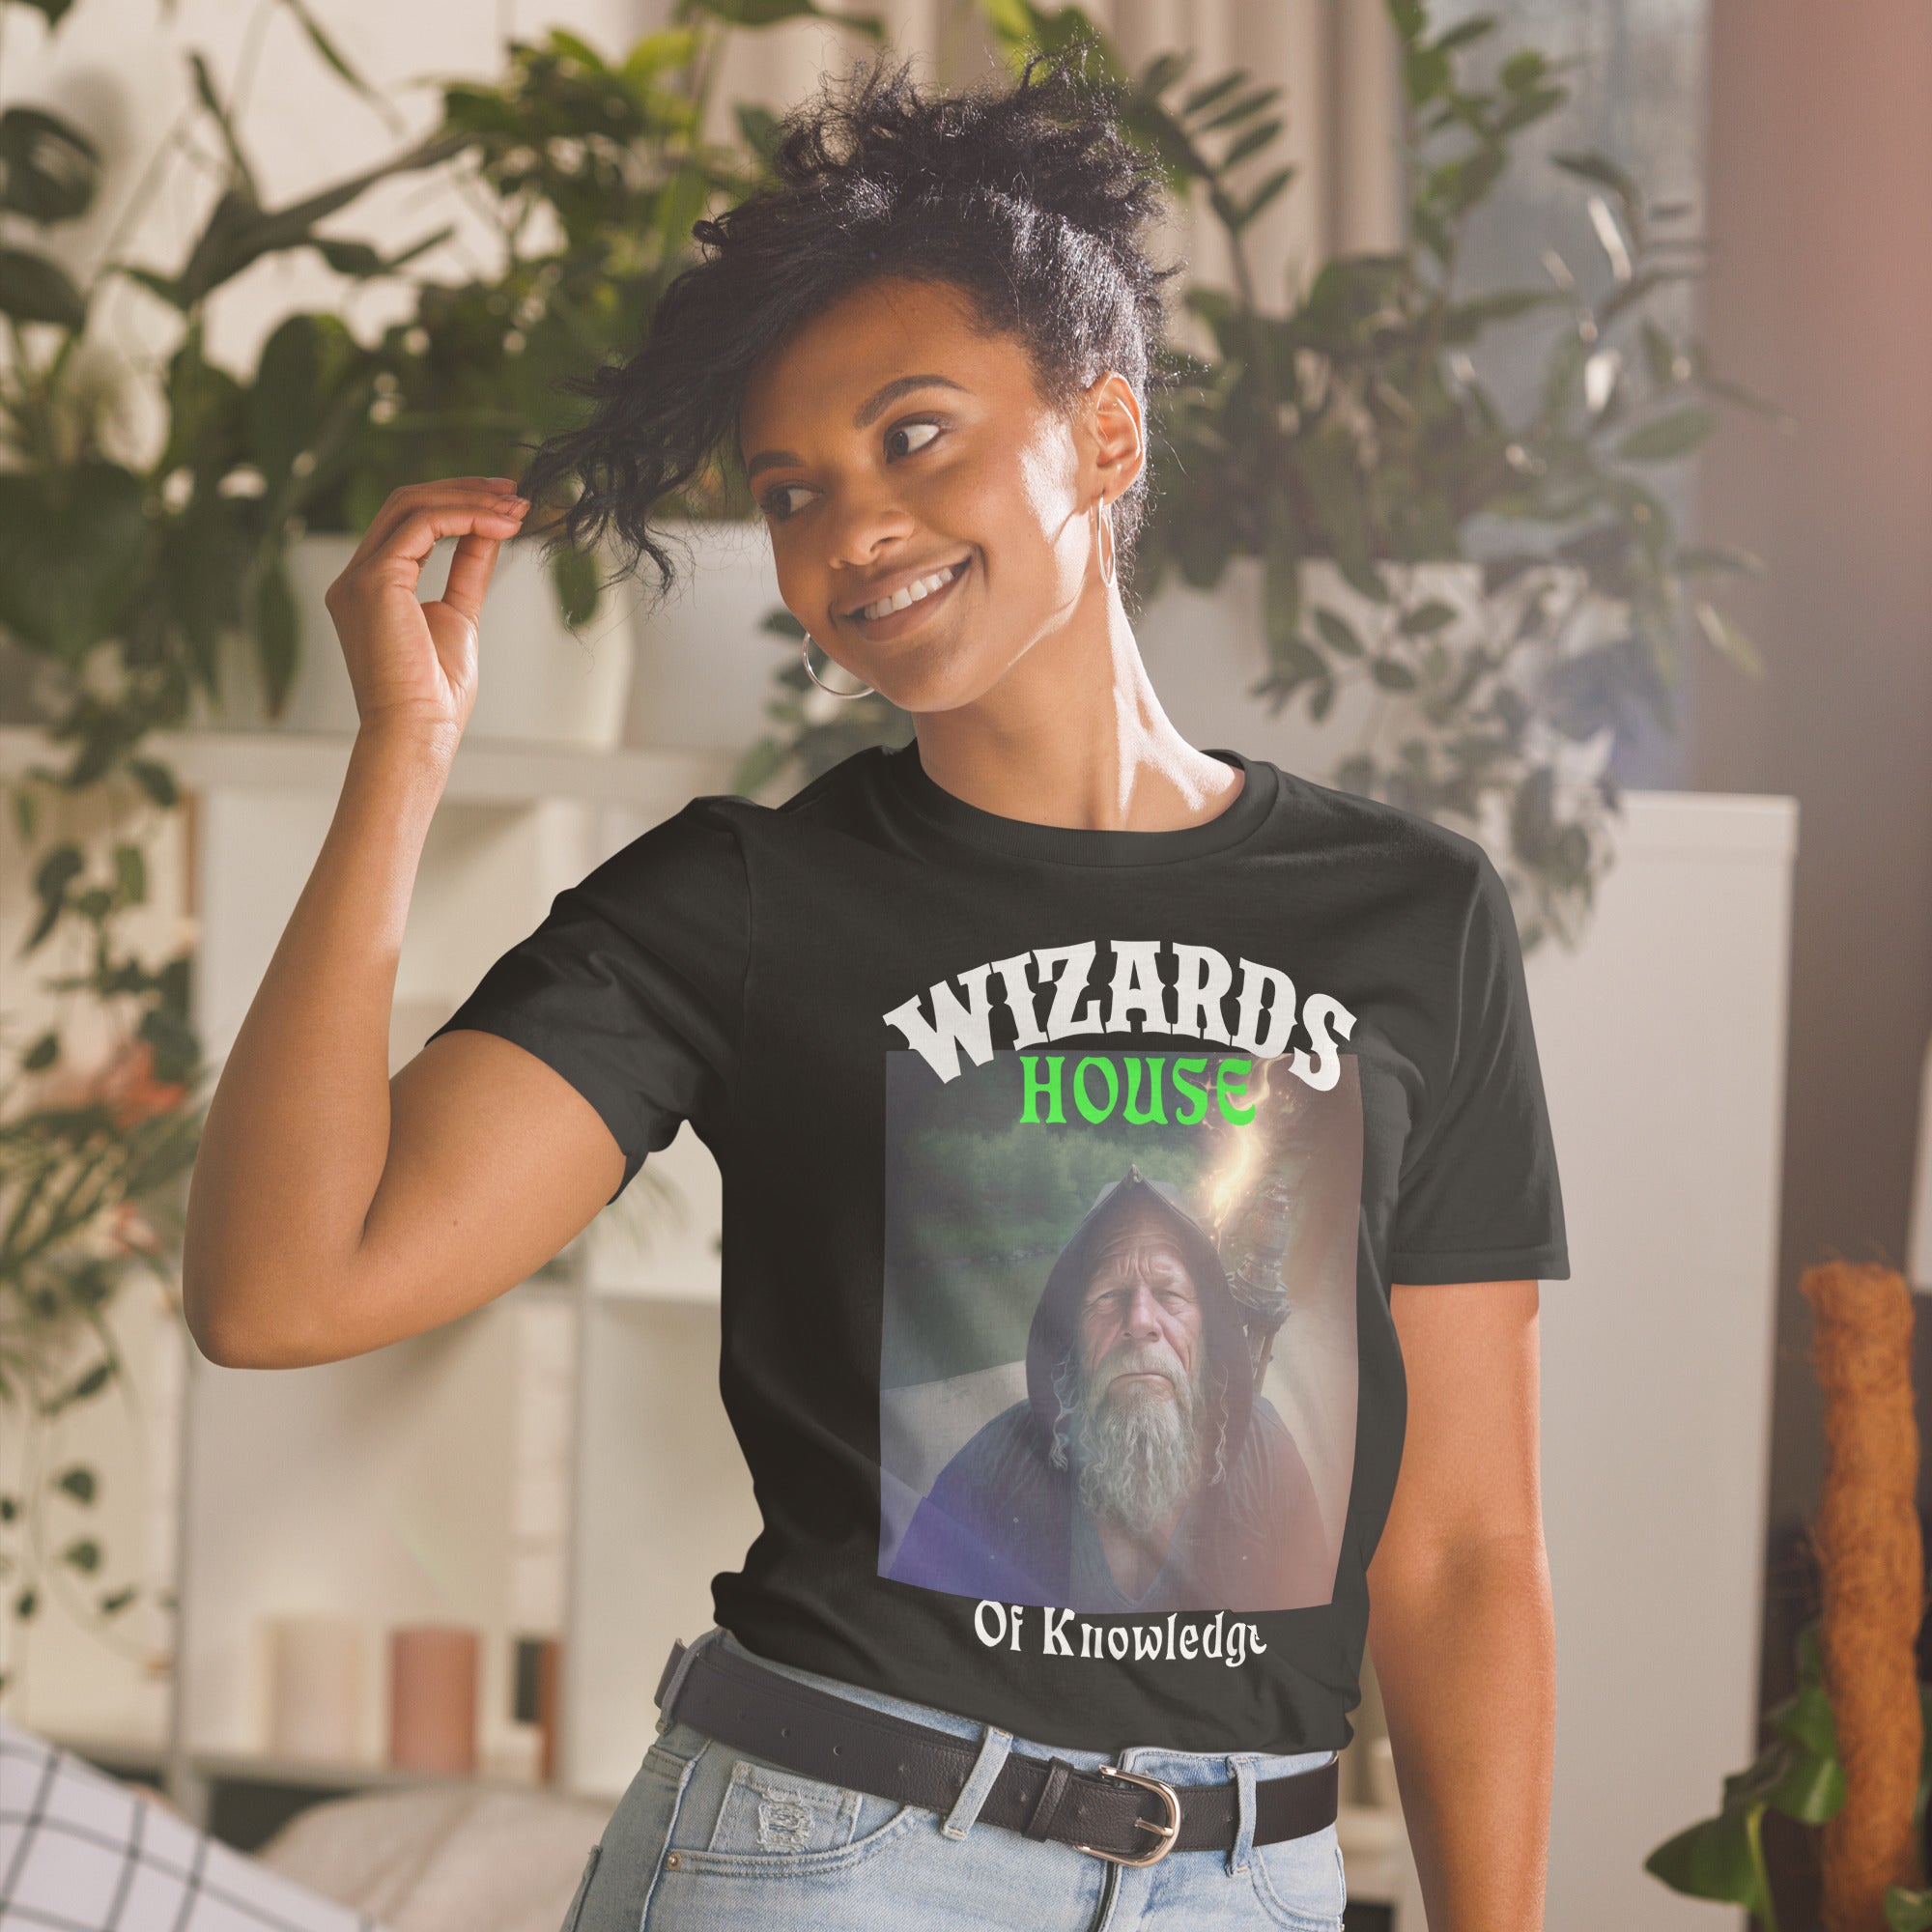 Wizards House of Knowledge Unisex T-Shirt